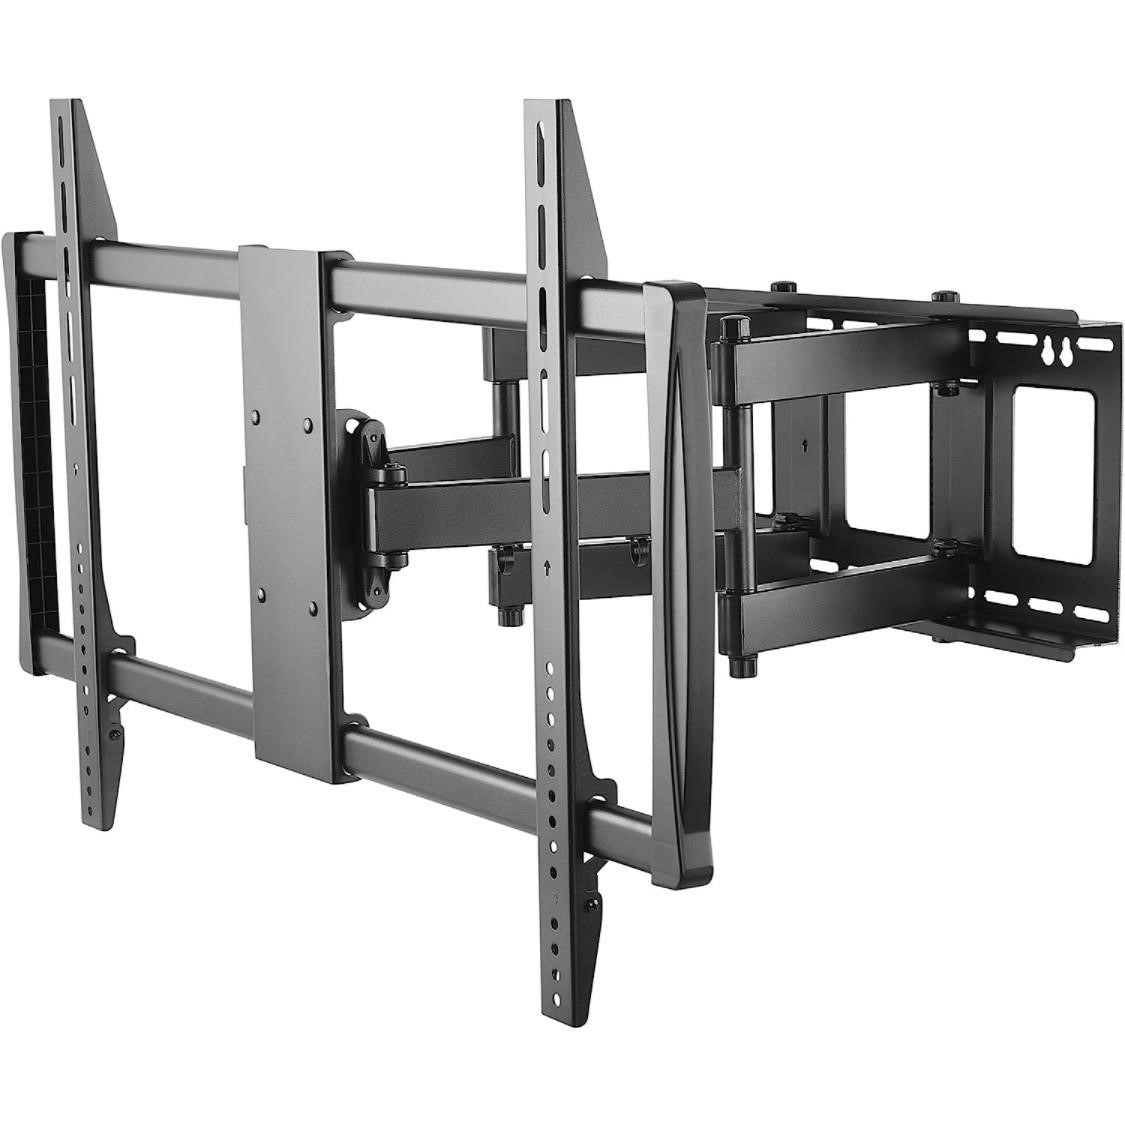 $150 Full Motion Articulating TV Wall Mount